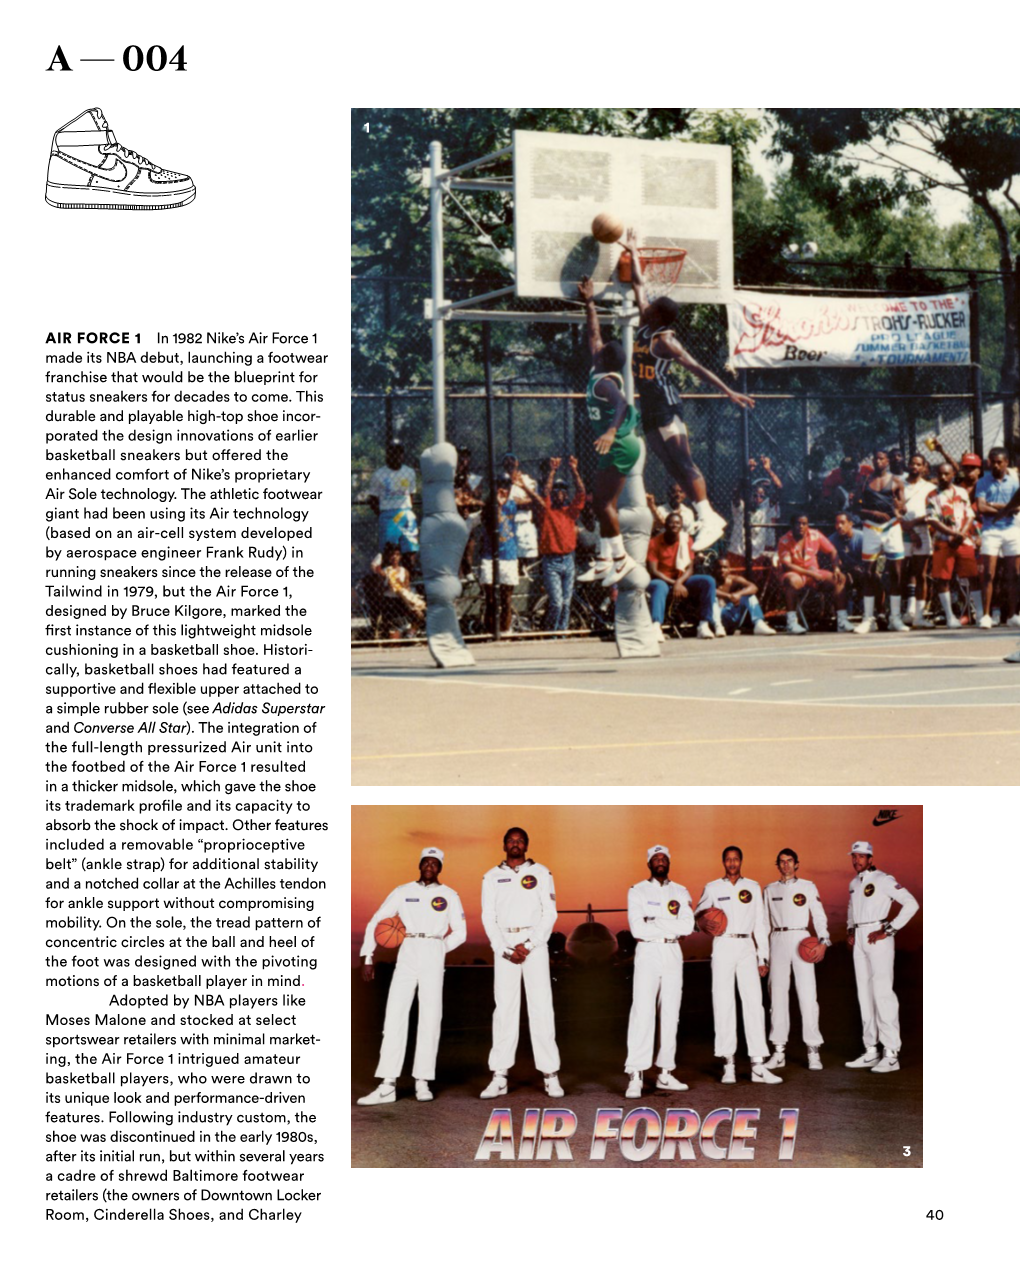 AIR FORCE 1 in 1982 Nike’S Air Force 1 Made Its NBA Debut, Launching a Footwear Franchise That Would Be the Blueprint for Status Sneakers for Decades to Come